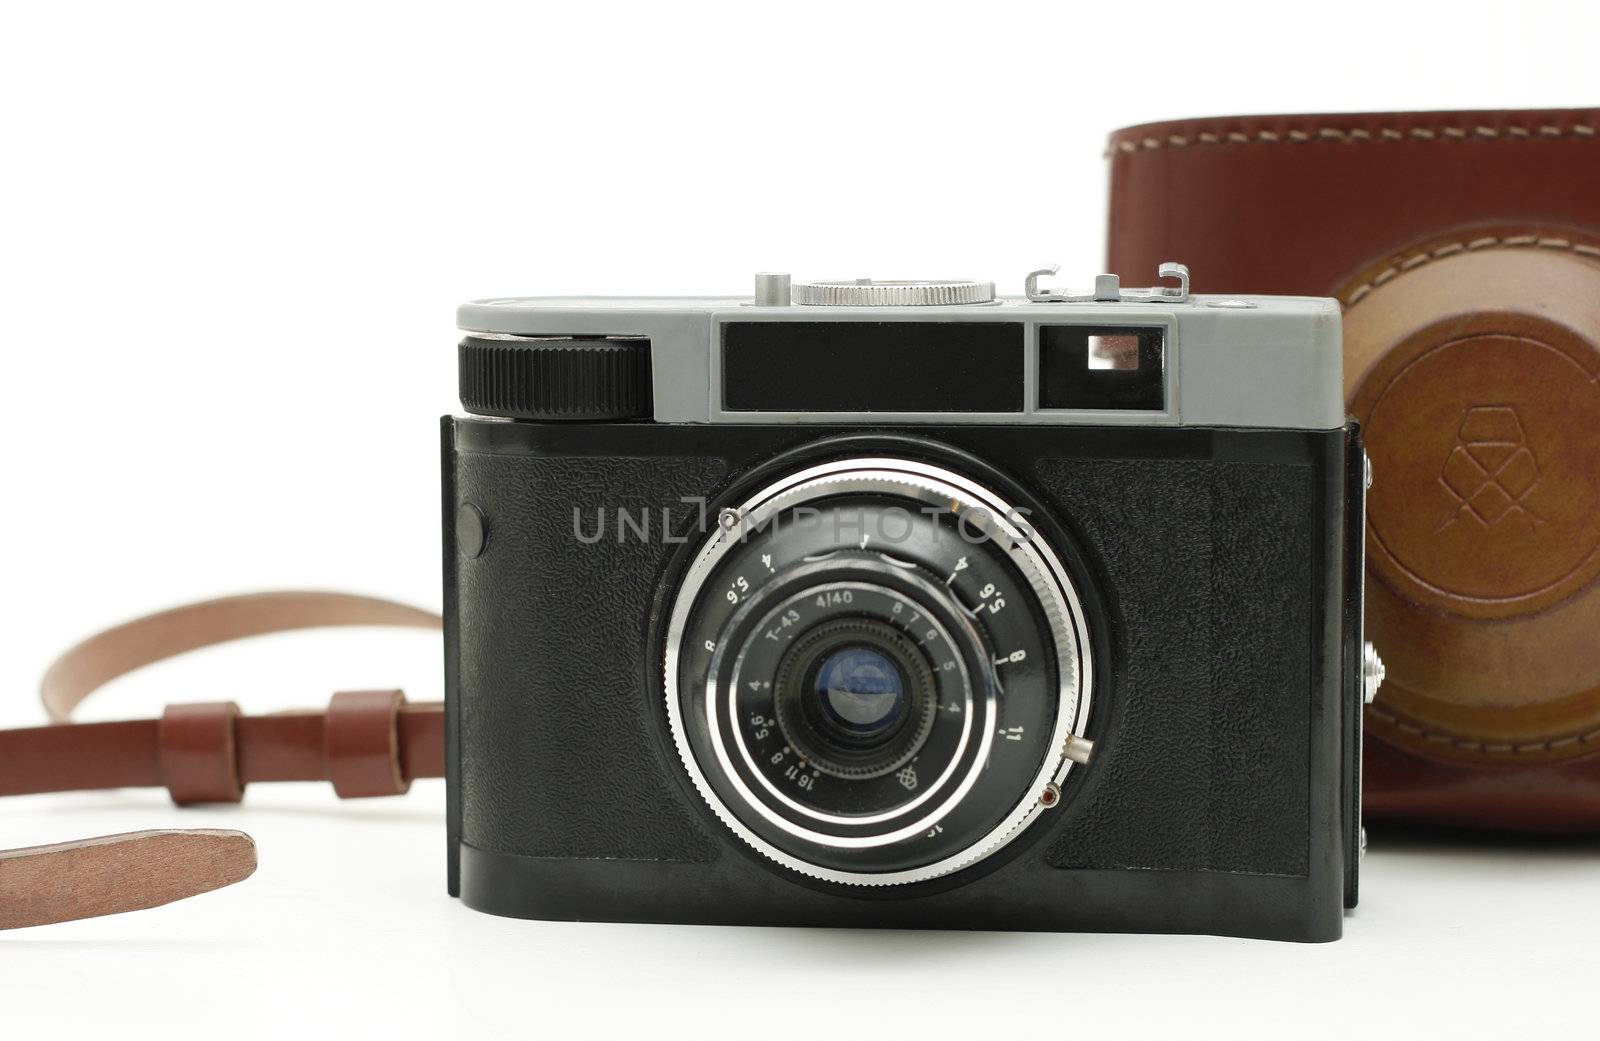 old antique analog photo camera isolated on white with authentic camera bag in background.